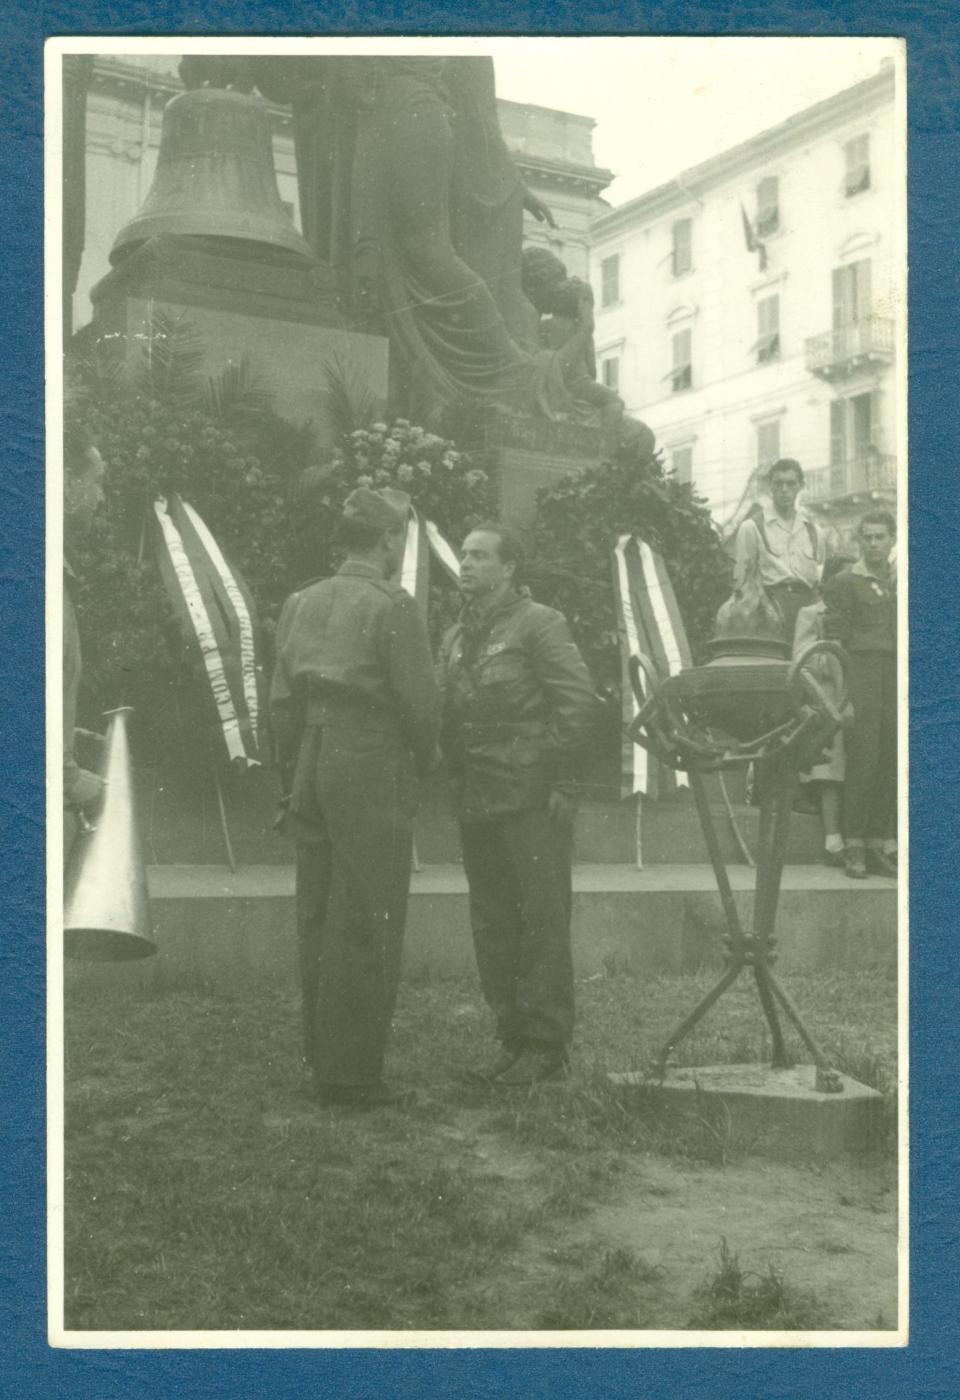 Comandante Enrico (right) transferring control of the city of Savona, Italy, from partisan to regular Italian army in May 1945.